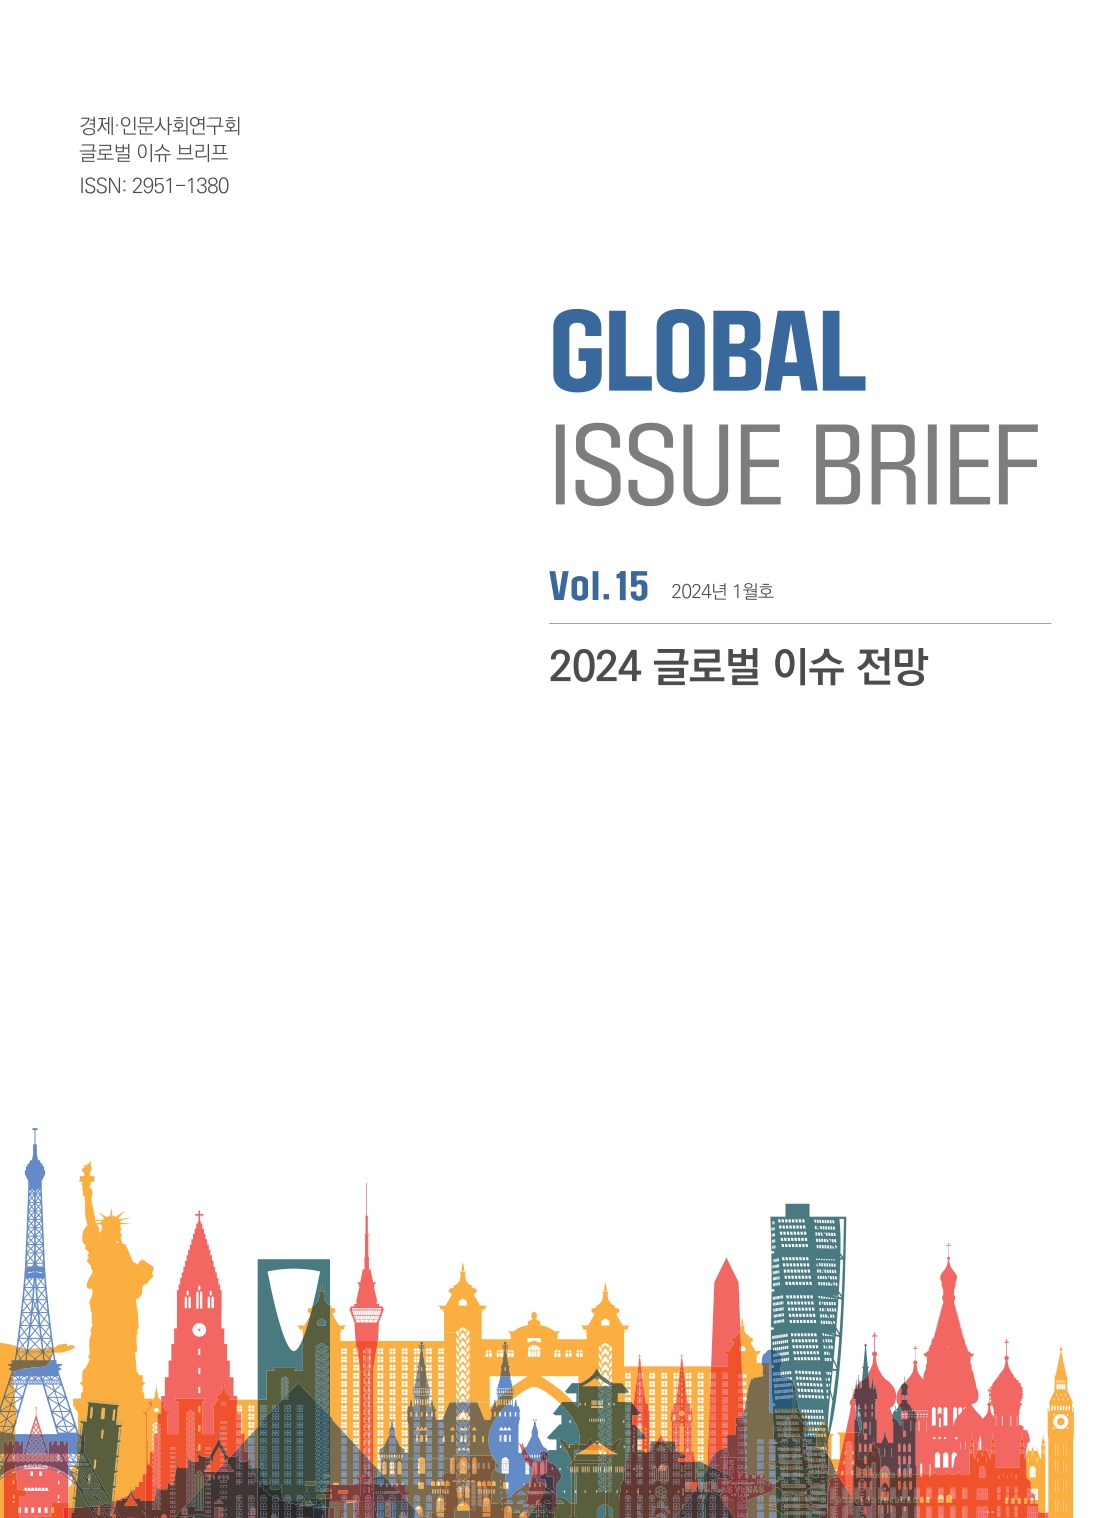 [Global Issue Brief] Vol.15